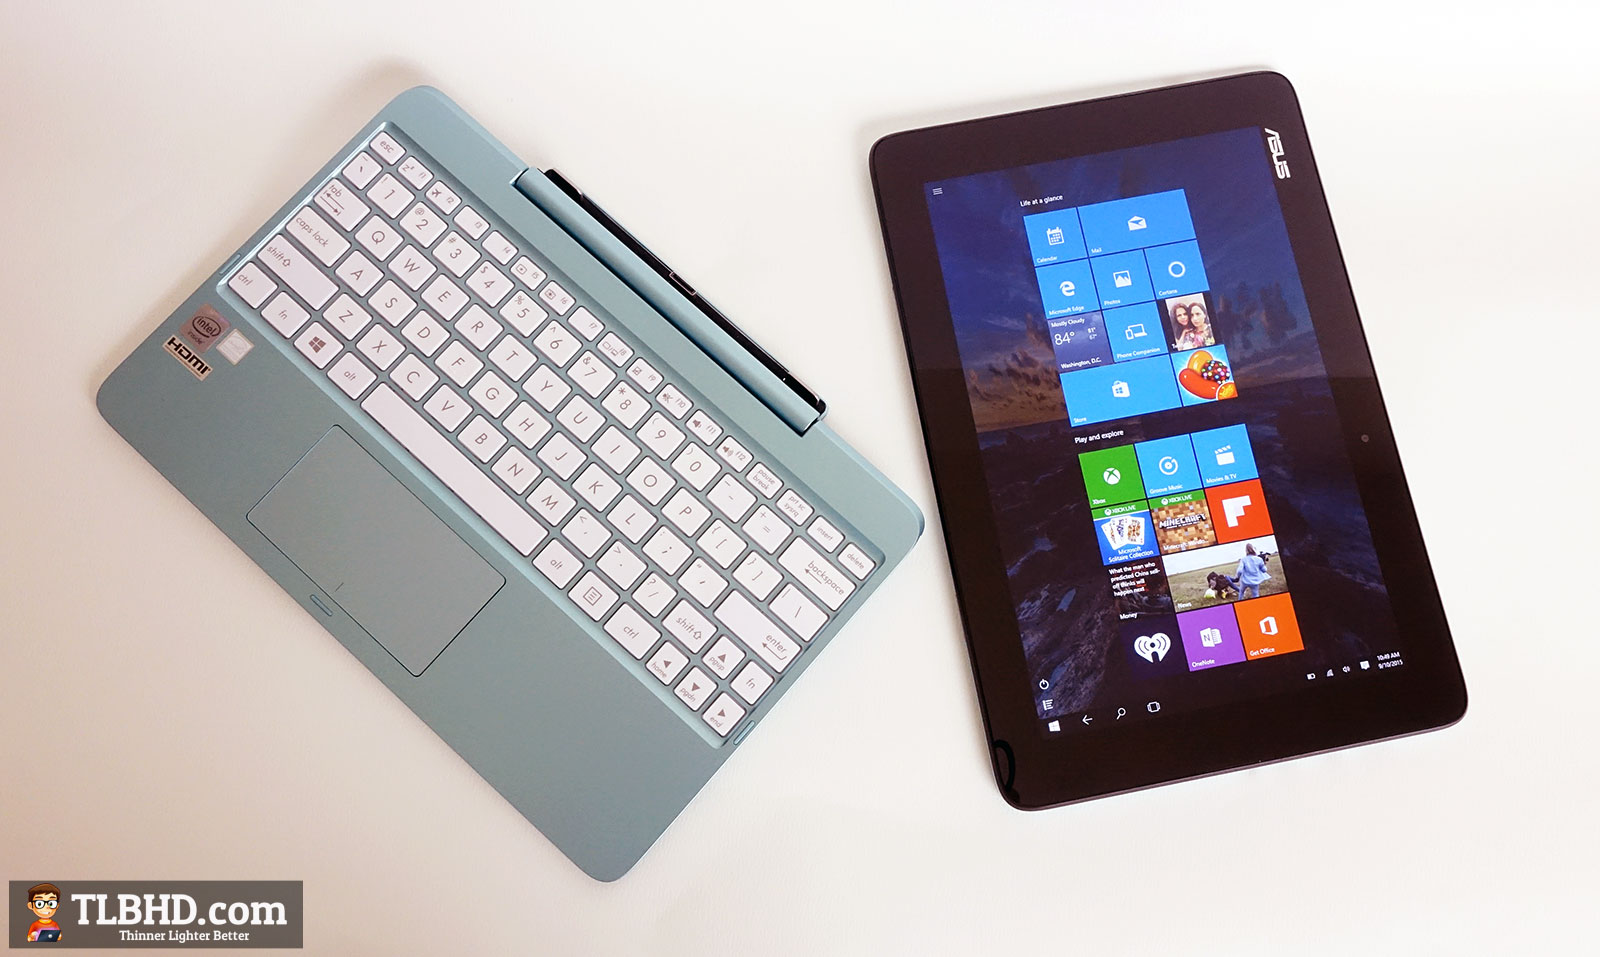 Asus Transformer Book T100HA review - the CherryTrail update